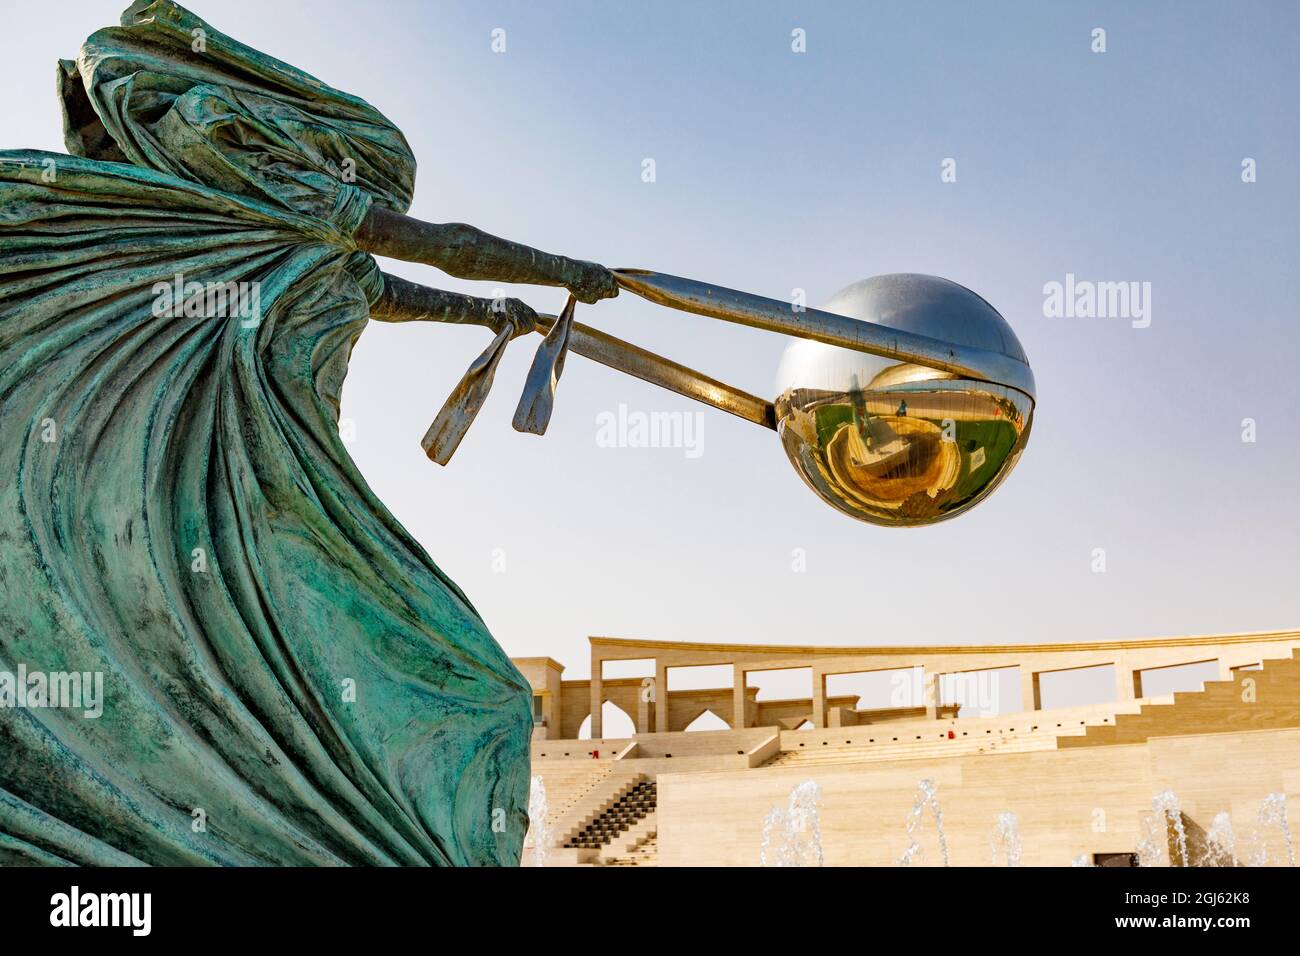 State of Qatar, Doha. Sculpture called 'Force of Nature' by Italian sculptor Lorenzo Quinn. (Editorial Use Only) Stock Photo